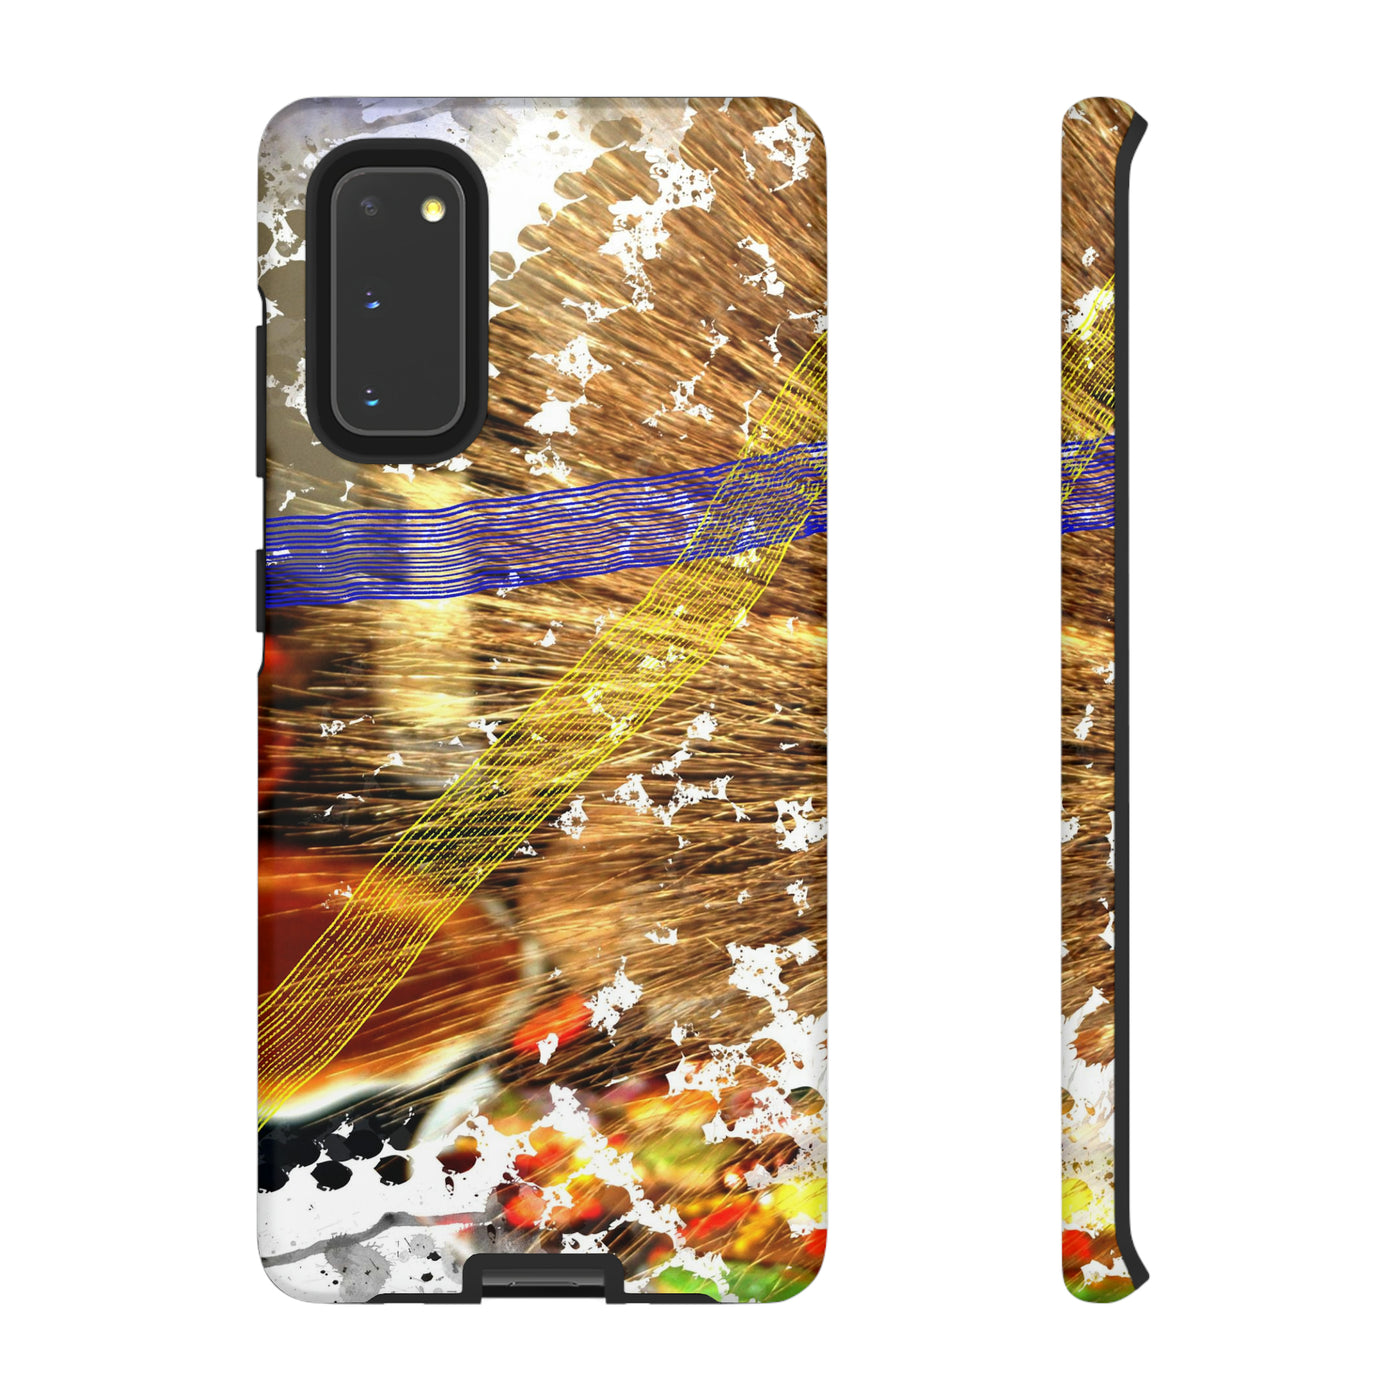 Cute Samsung Phone Case | Aesthetic Samsung Phone Case | Fall Pecan Pie | Galaxy S23, S22, S21, S20 | Luxury Double Layer | Cool